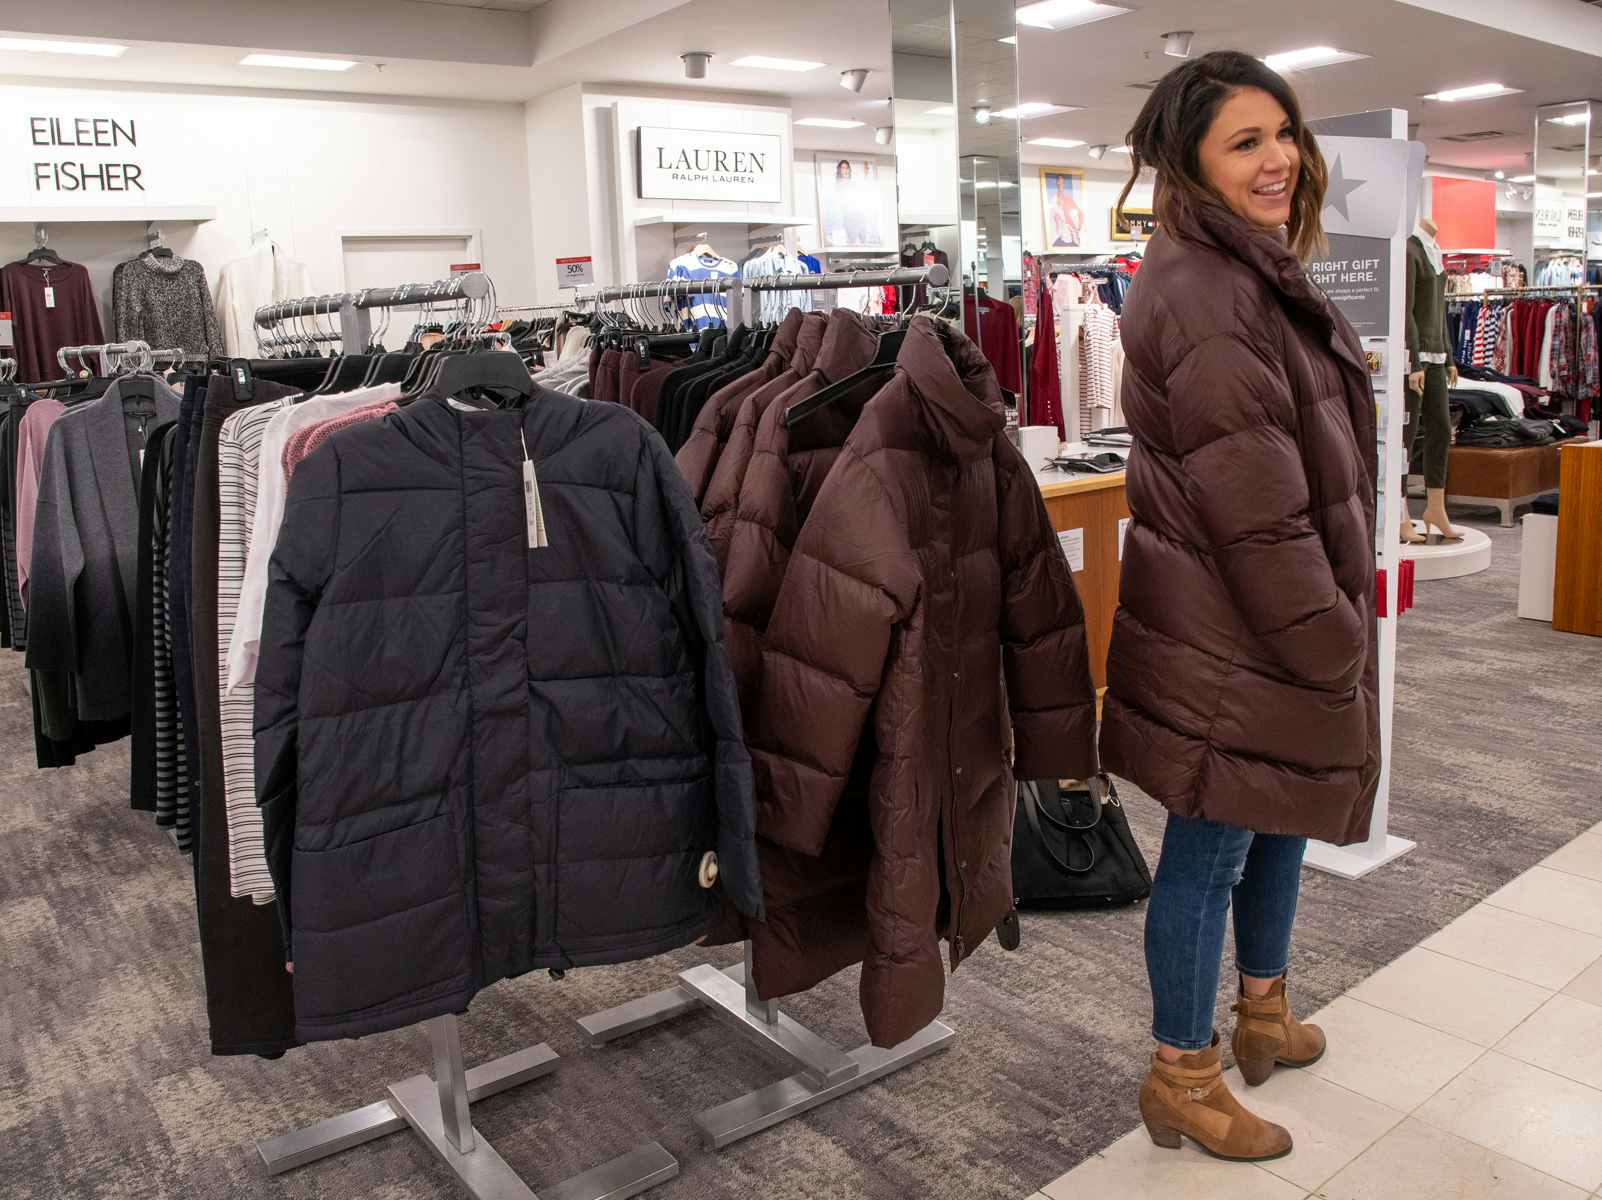 north face winter coats macy's online sales,Up To OFF53 %